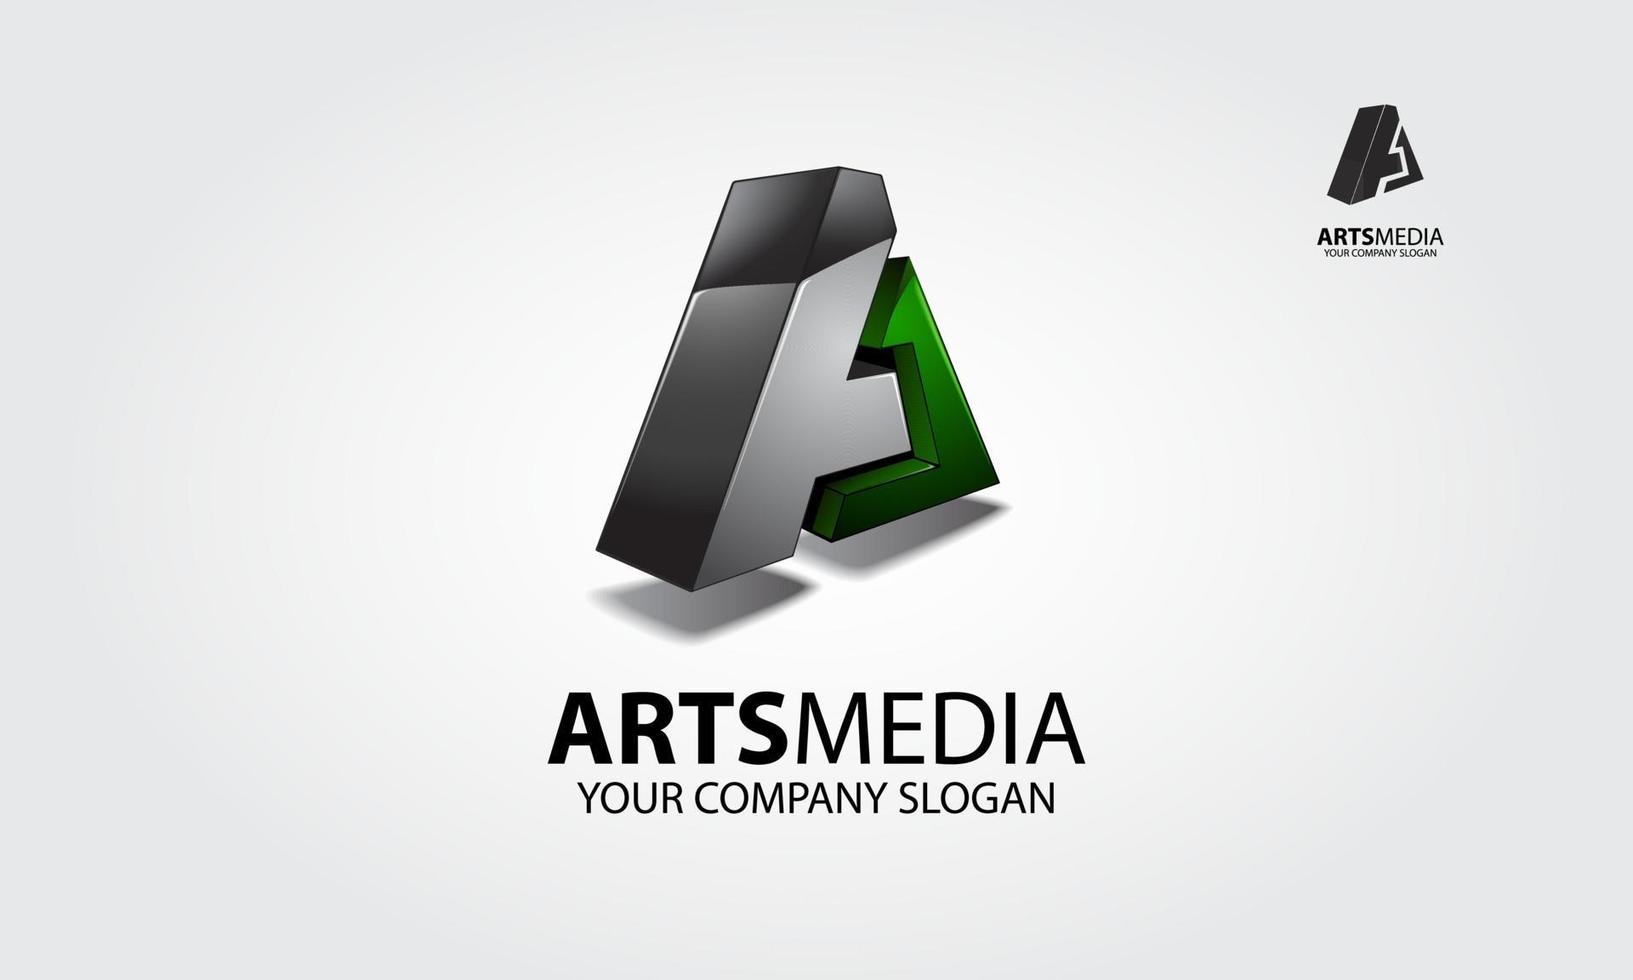 Art Media Vector Logo. This letter of A or it's an initial logo, it's a 3 D vector logo with shiny effect, try to symbolize a media, studio, high technology, advance technology, smart, and modernity.